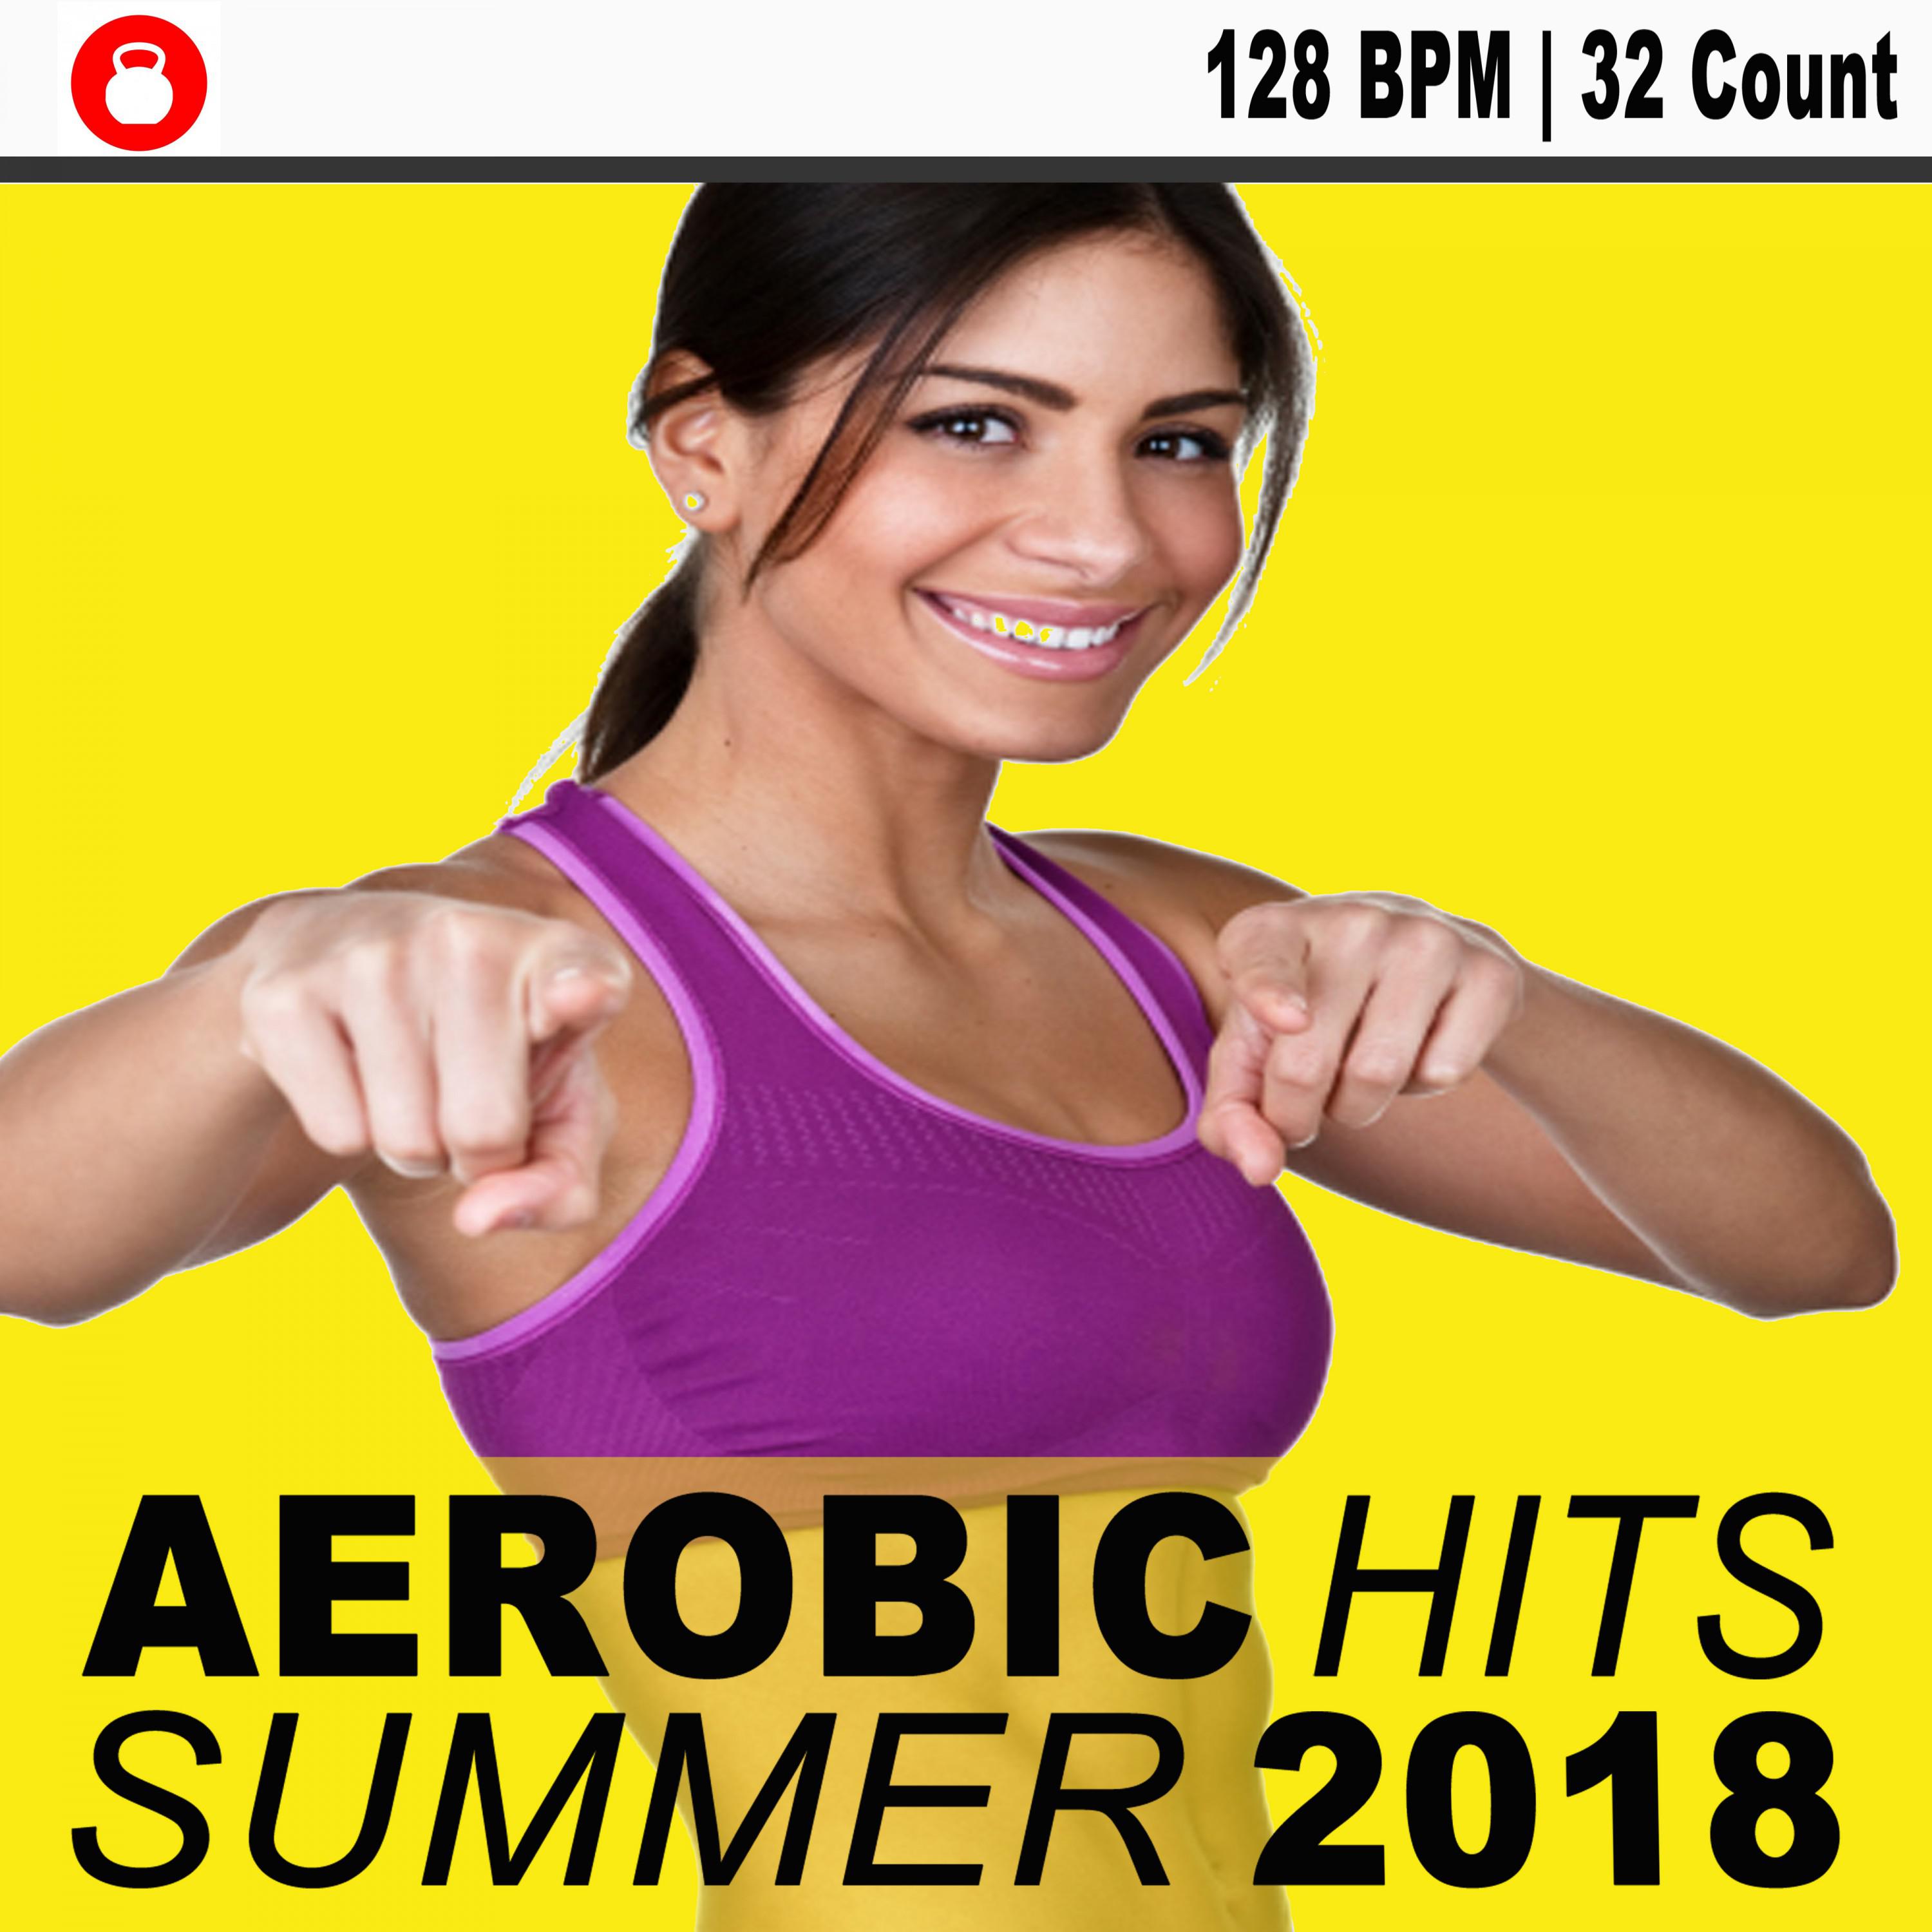 Aerobic Hits Summer 2018 (128 Bpm - 32 Count Powerful Motivated Music for Your High Intensity Interval Training)